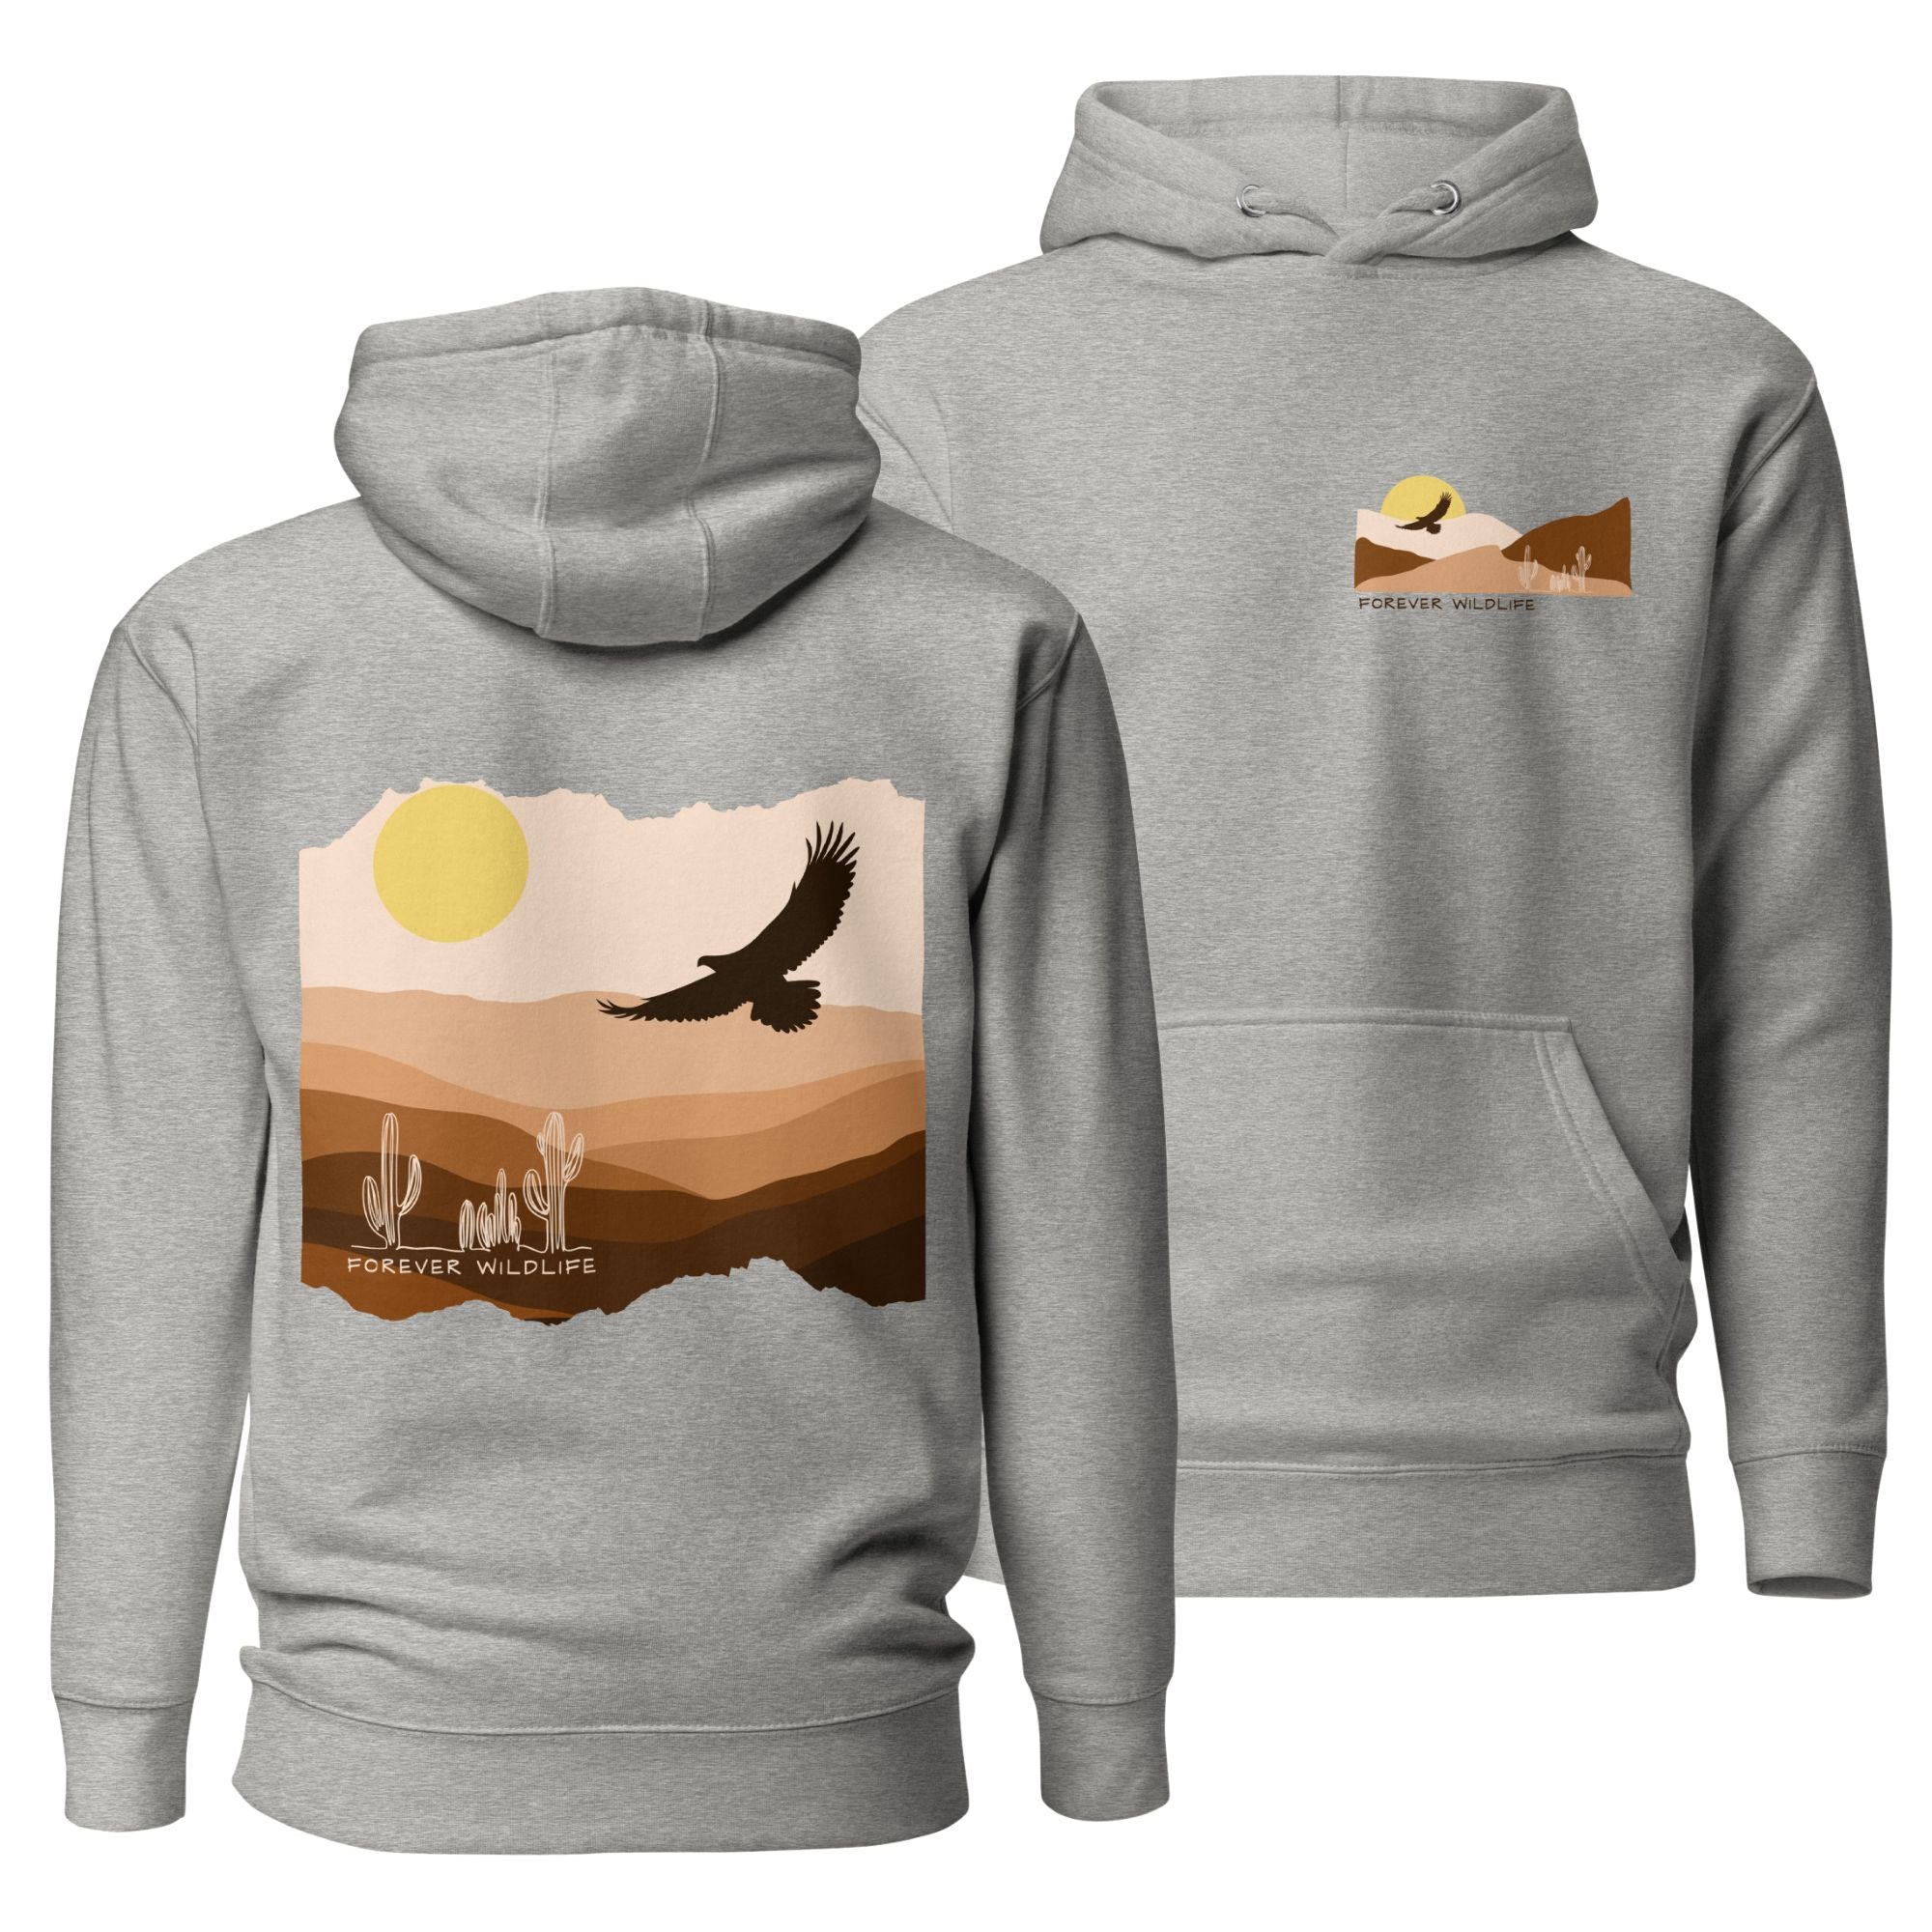  Eagle Hoodie, beautiful grey Eagle hoodie with eagle soaring over the desert part of Wildlife Hoodies collection.